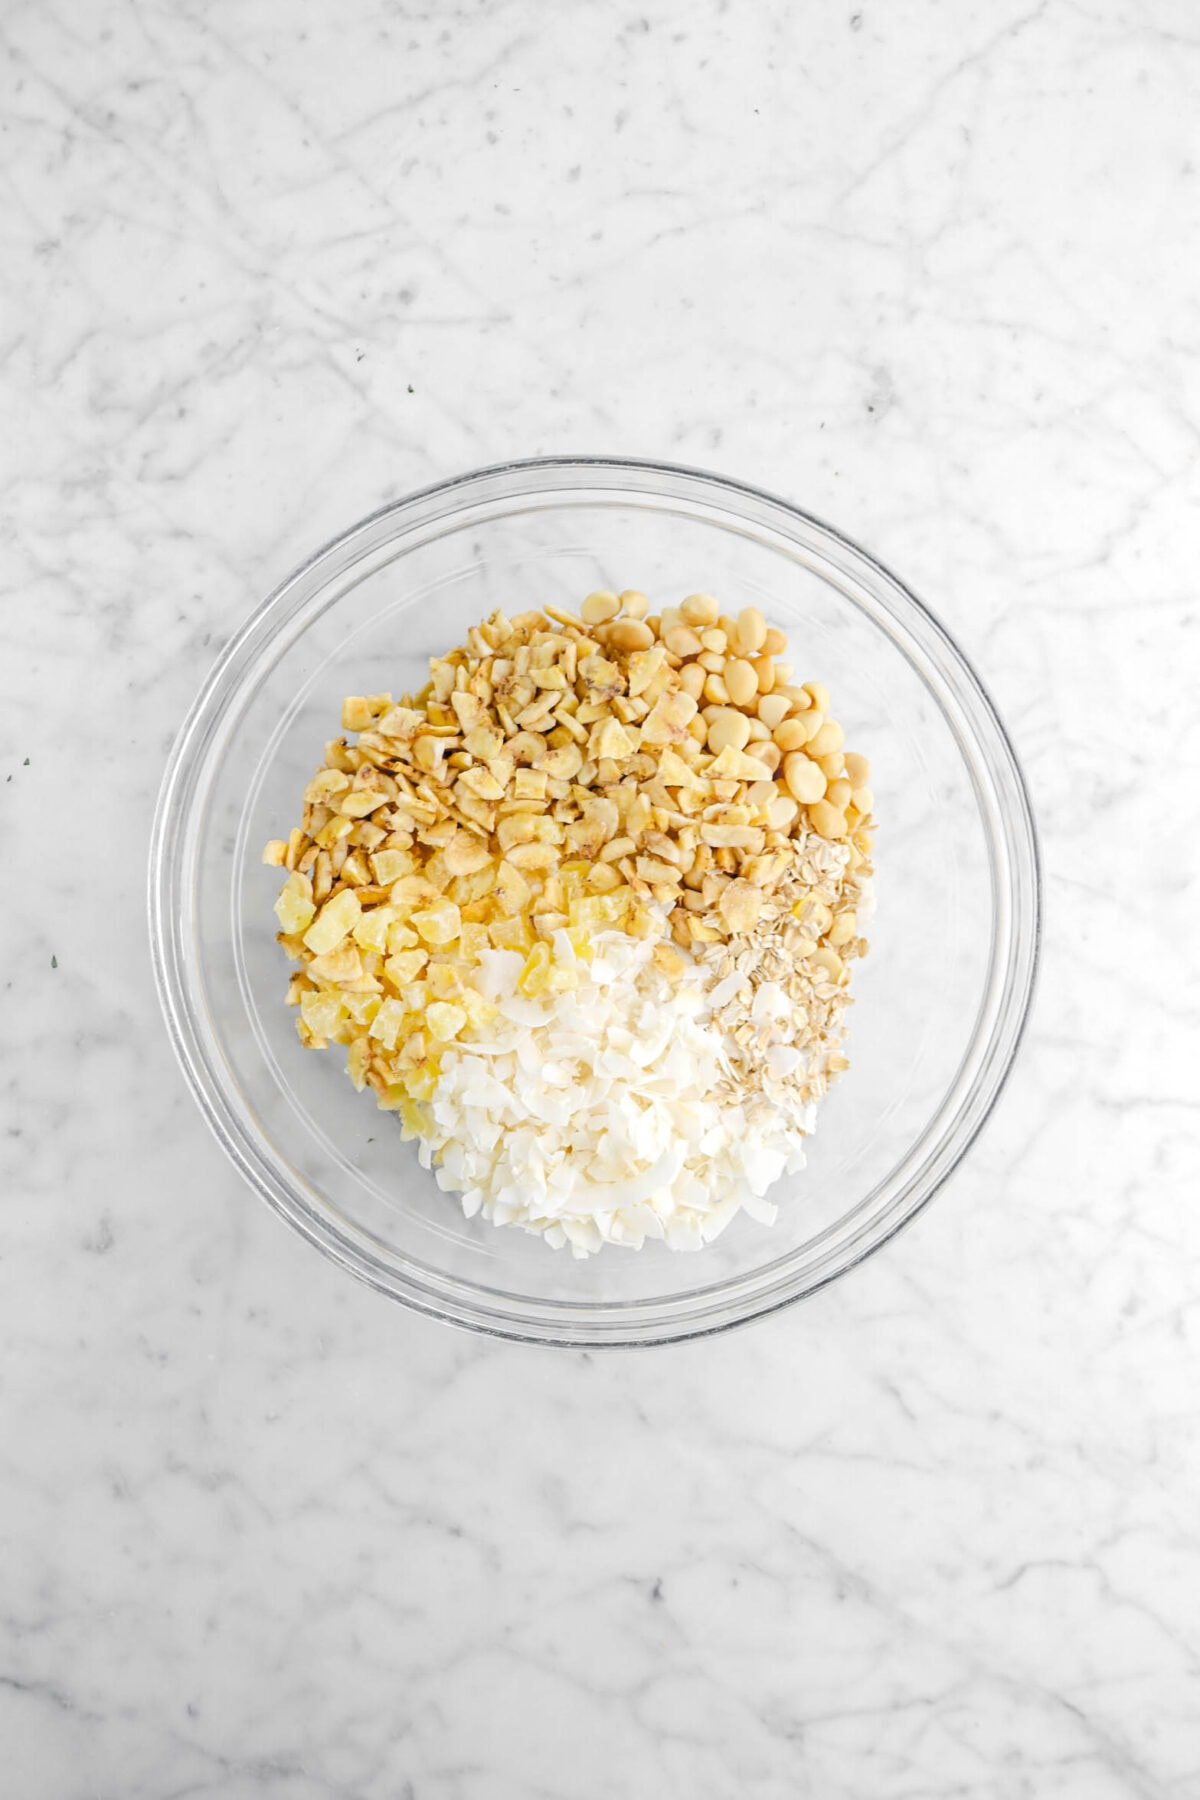 oats, coconut flakes, dried pineapple, banana chips, and macadamia nuts in glass bowl on marble surface